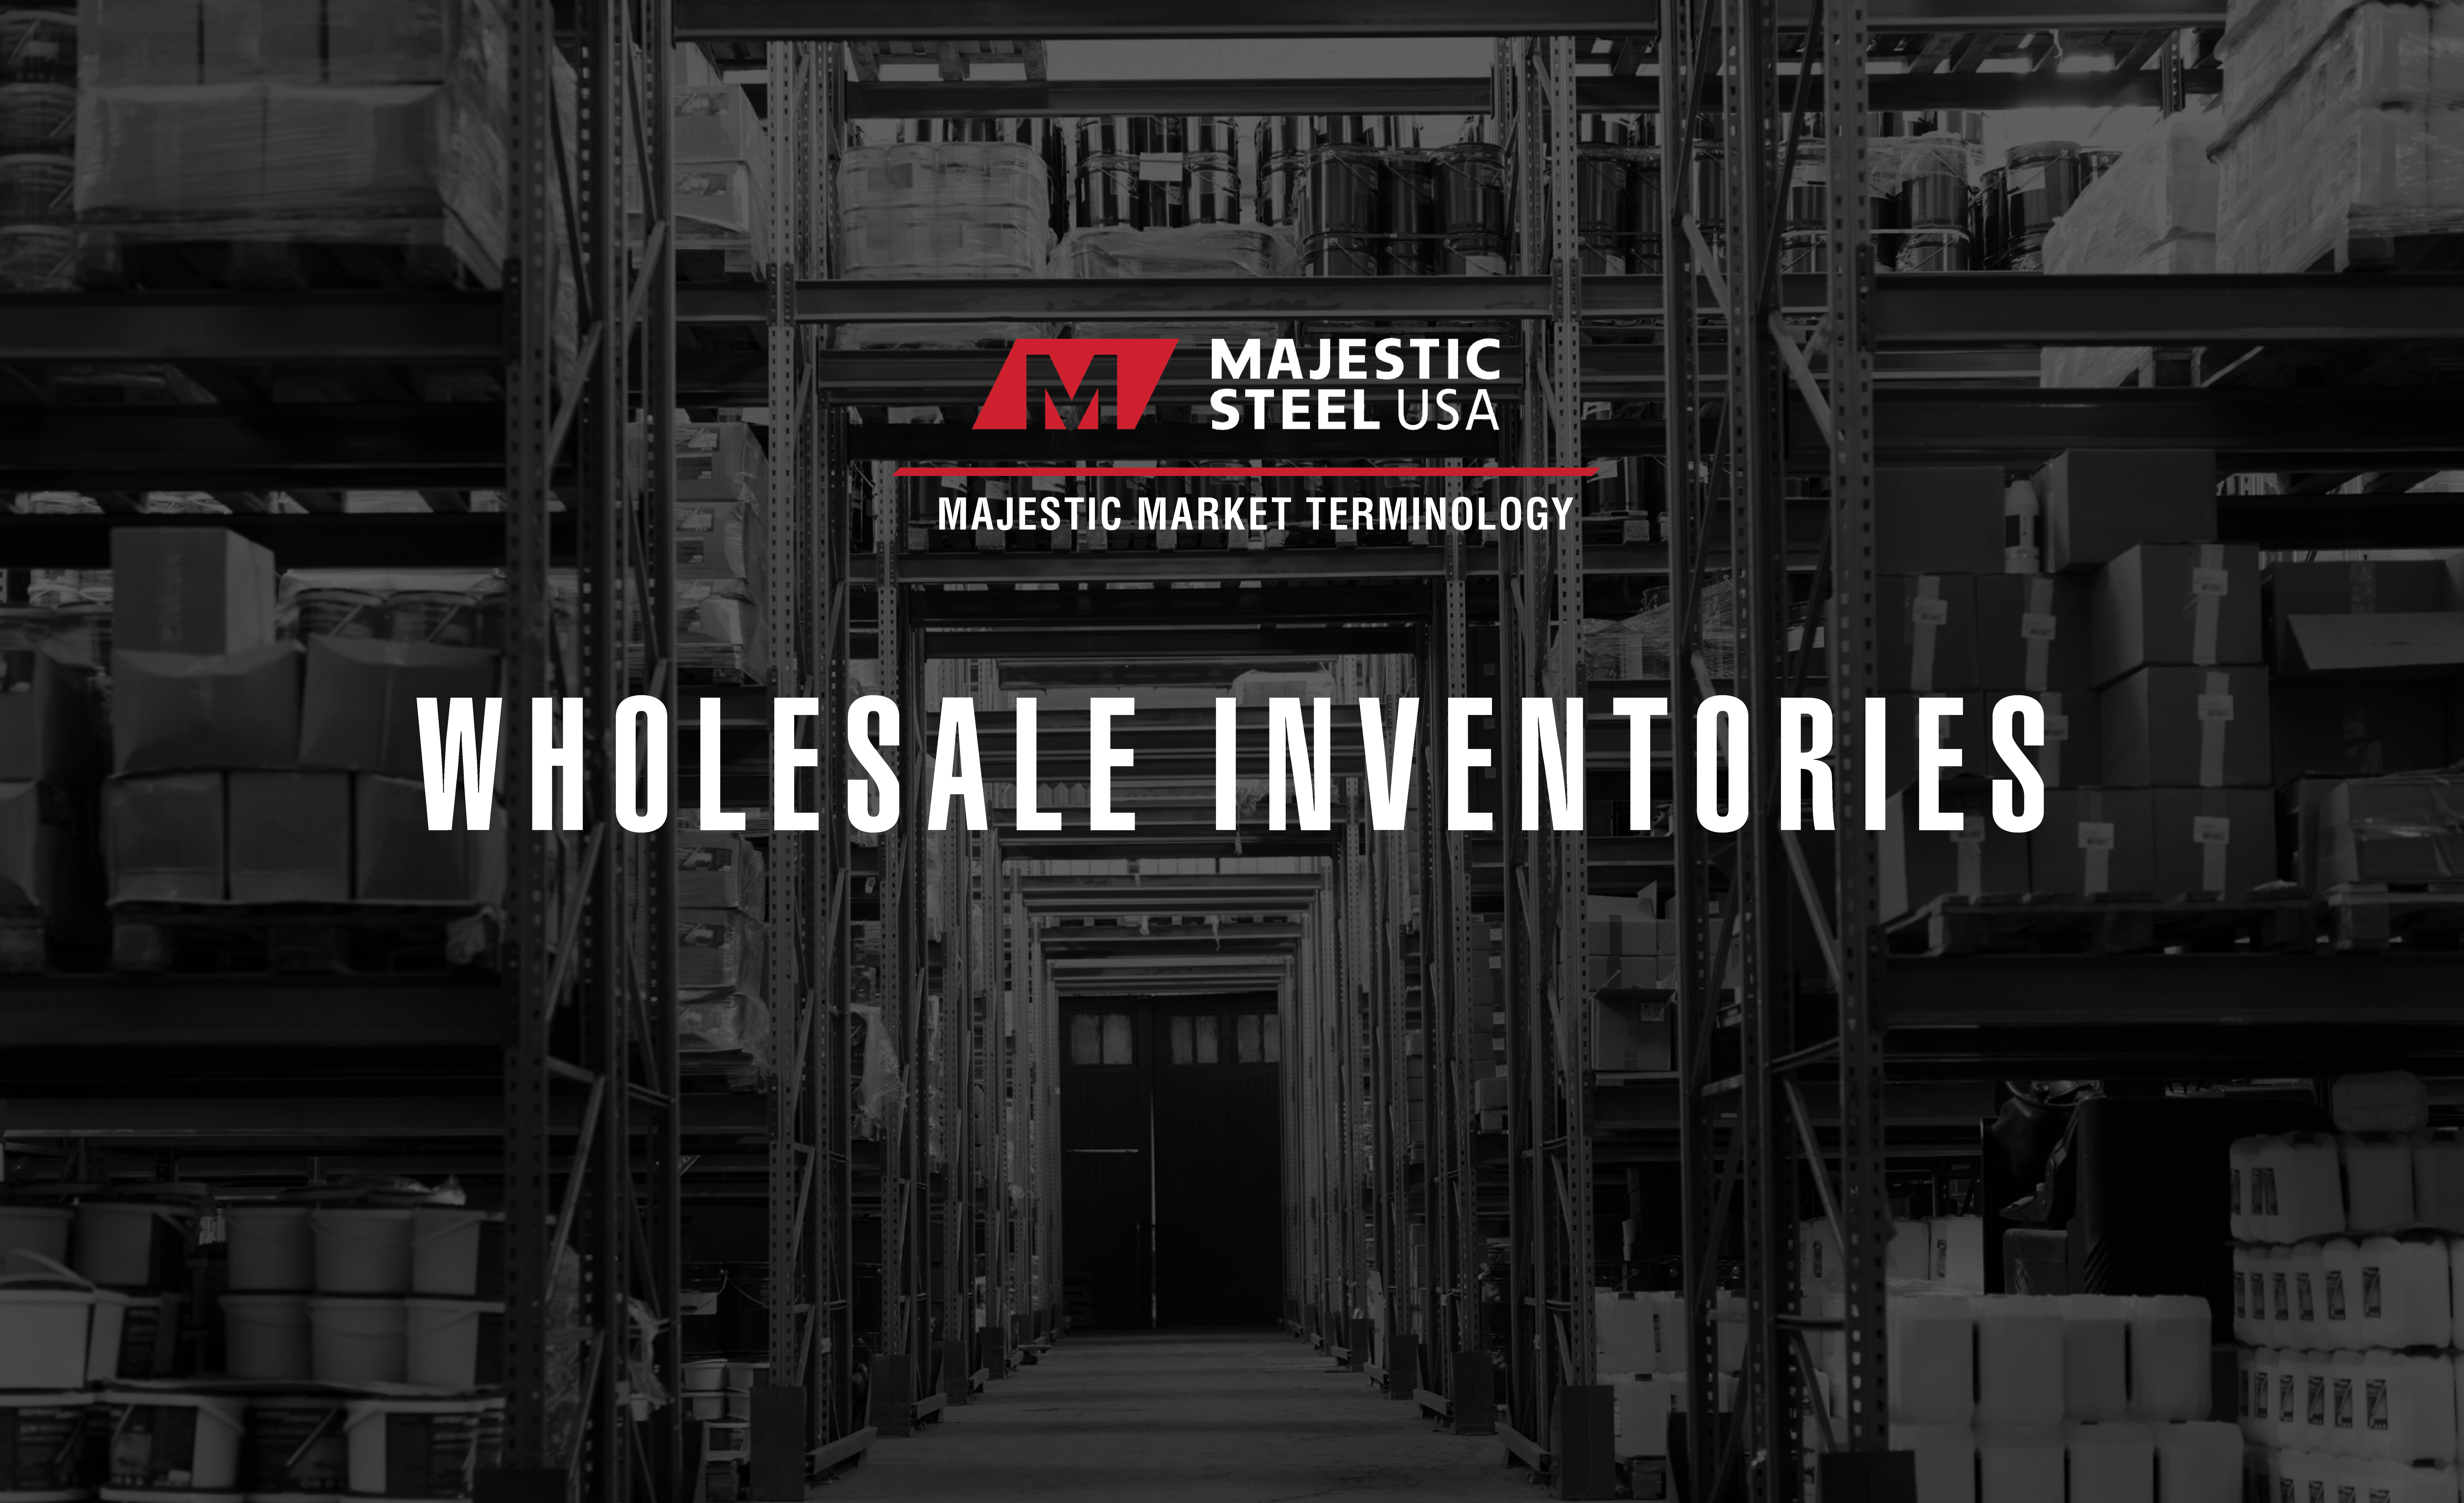 black and white image of inventory to represent wholesale inventories